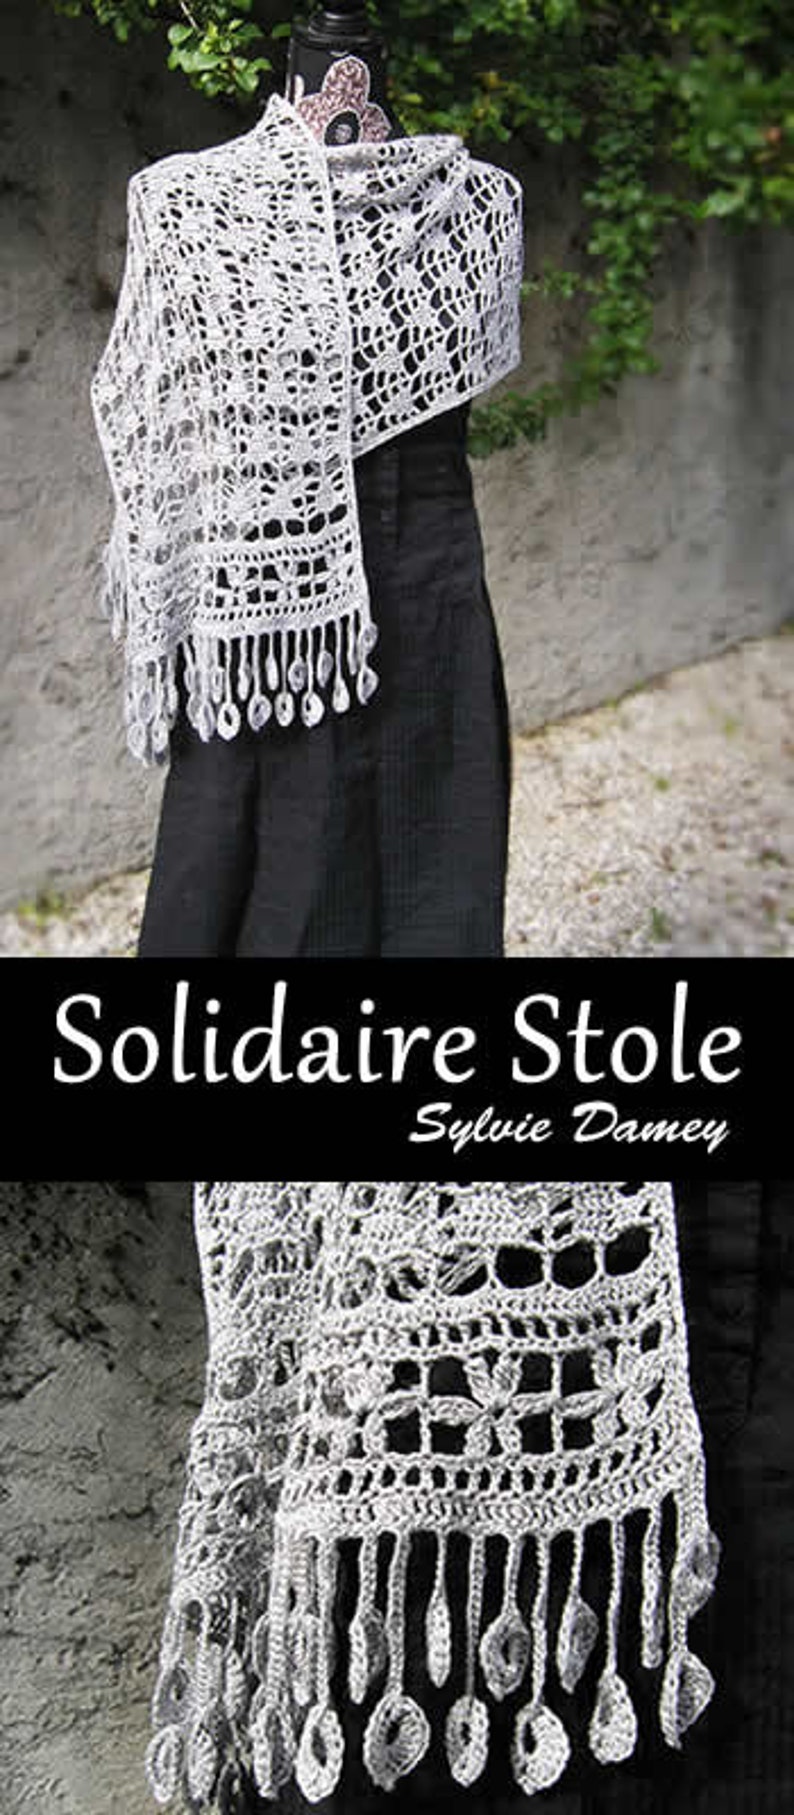 Solidaire stole étole solidaire, crochet pattern in pdf to make a lacy summer stole image 7